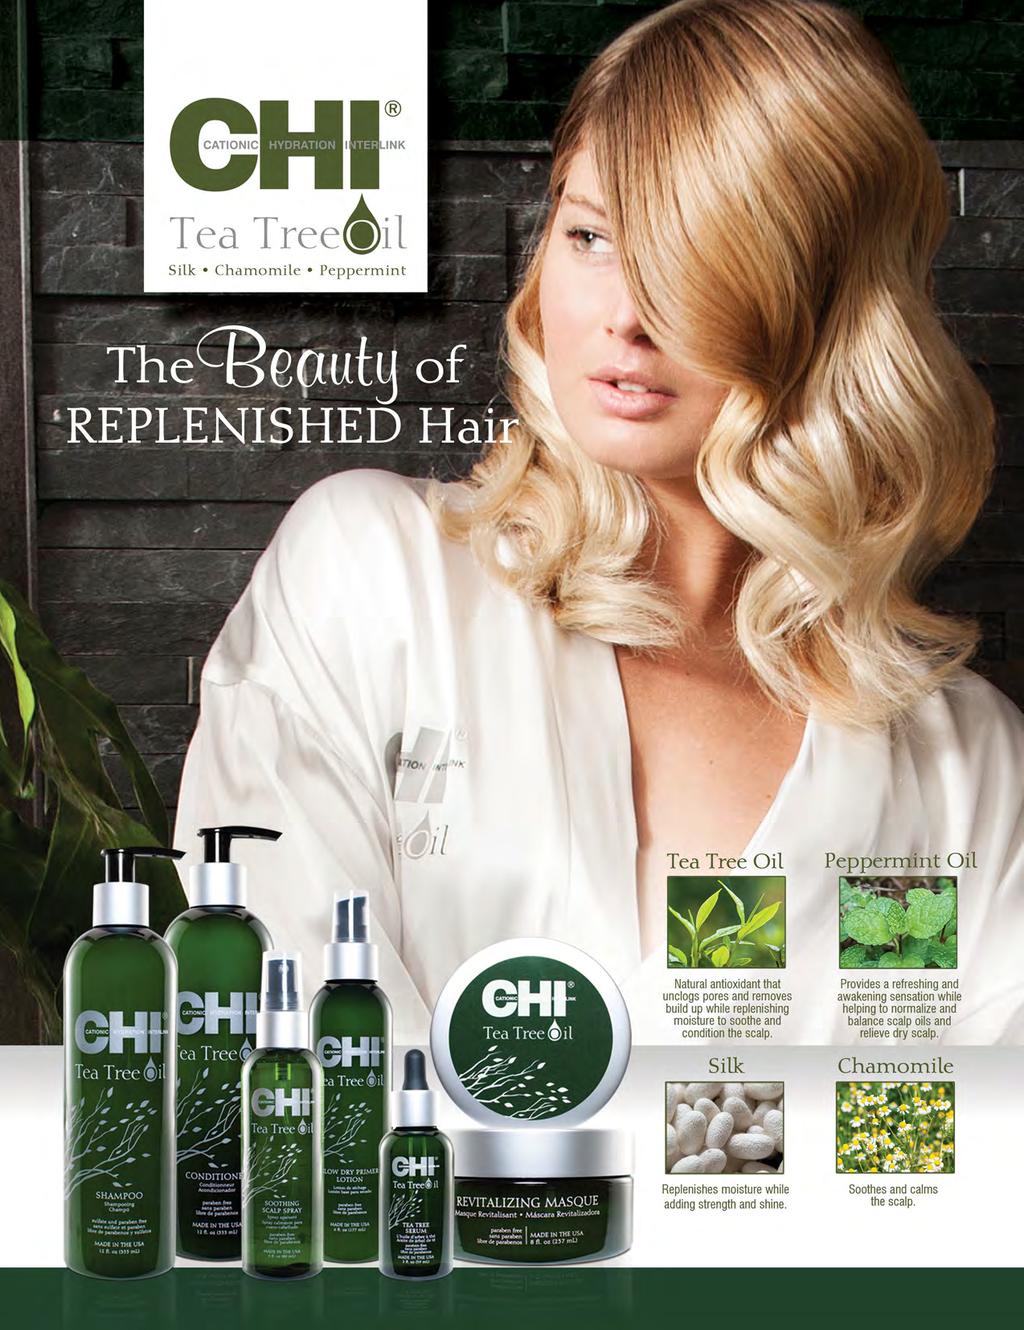 CHI Tea Tree Oil CHI Tea Tree Oil products provide the essential benefits of a refreshing combination of tea tree and peppermint to help balance hair oils, maintain moisture, and invigorate the hair